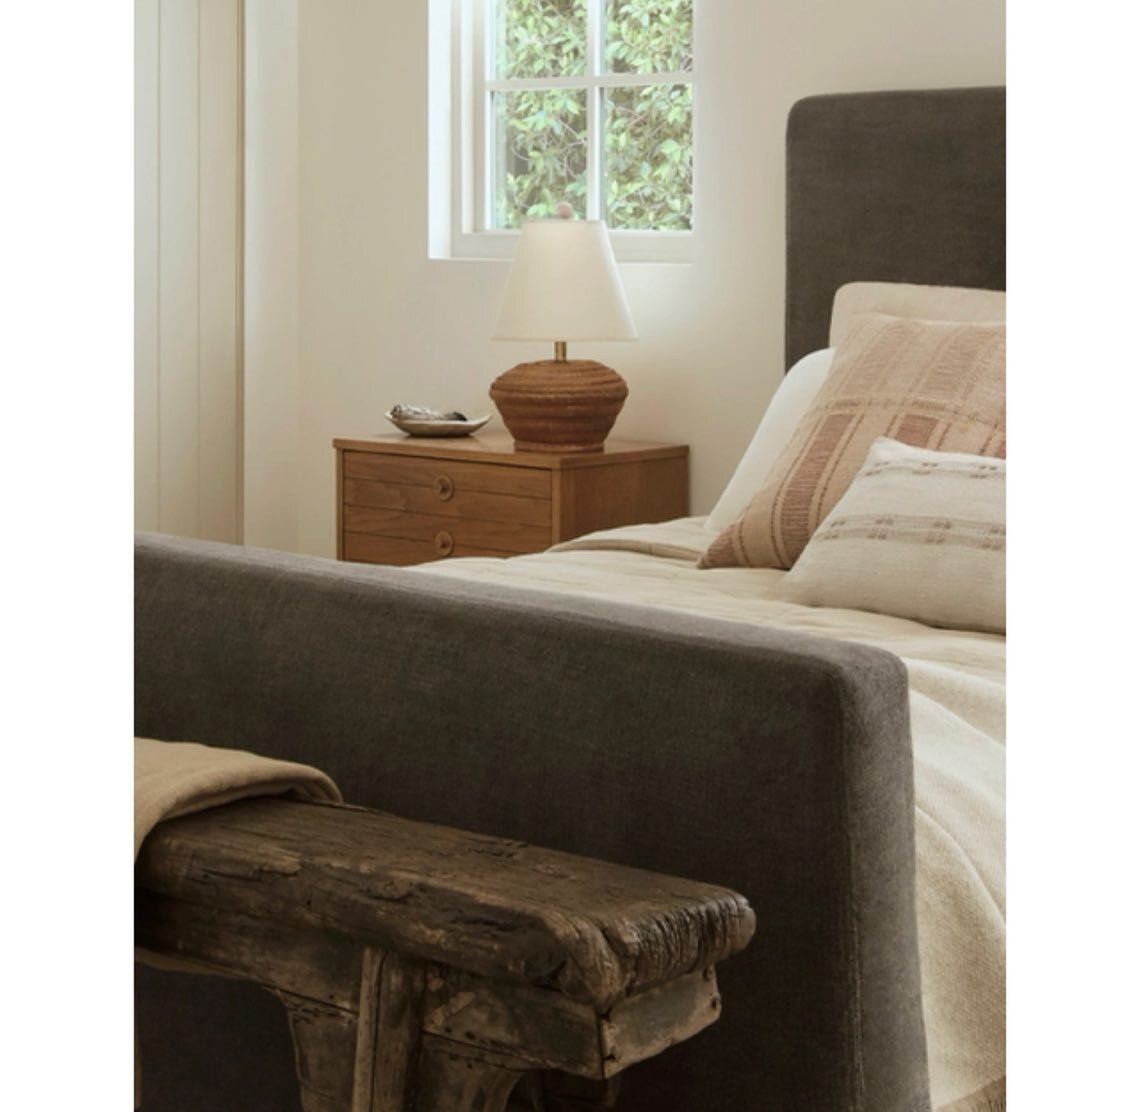 Affordable Guest bedroom refresh under $1000 
Inspo, budget, execute.

https://liketk.it/3ycGU
Bed: living spaces dean charcoal bed, can&rsquo;t tag

#homedecor #homerefresh #interiordesign #targethome